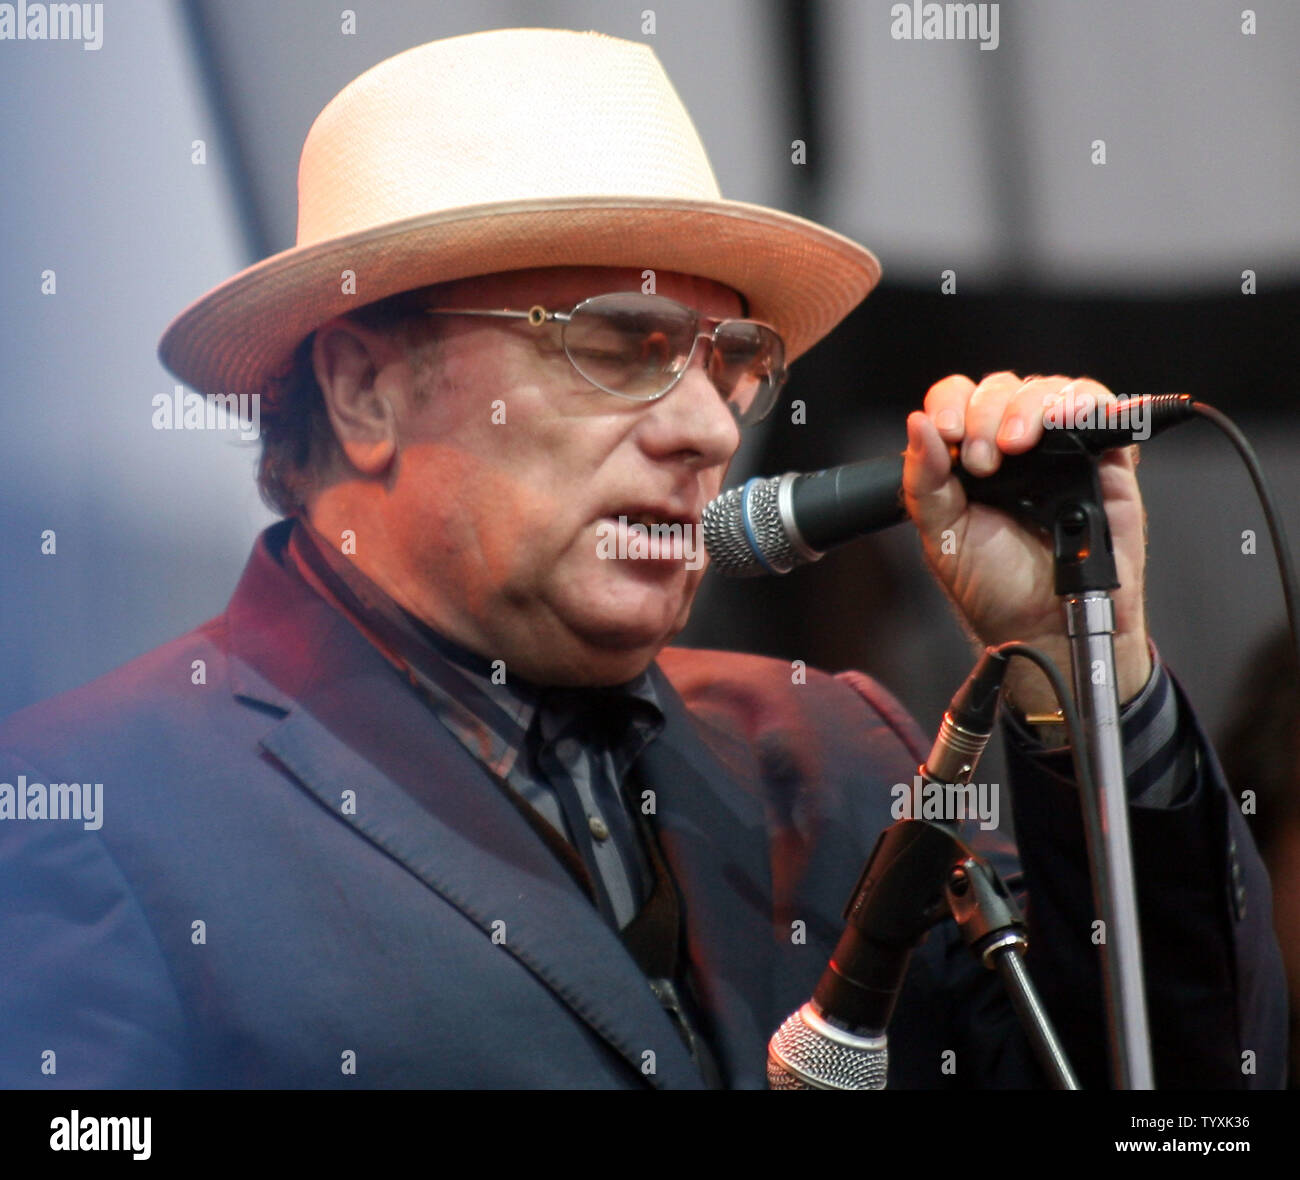 Van Morrison opens the Cisco Ottawa Bluesfest at Lebreton Flats in Ottawa, Canada on July 4, 2007. This is his first performance in the nation's capital after forty years.  (UPI Photo/Grace Chiu). Stock Photo